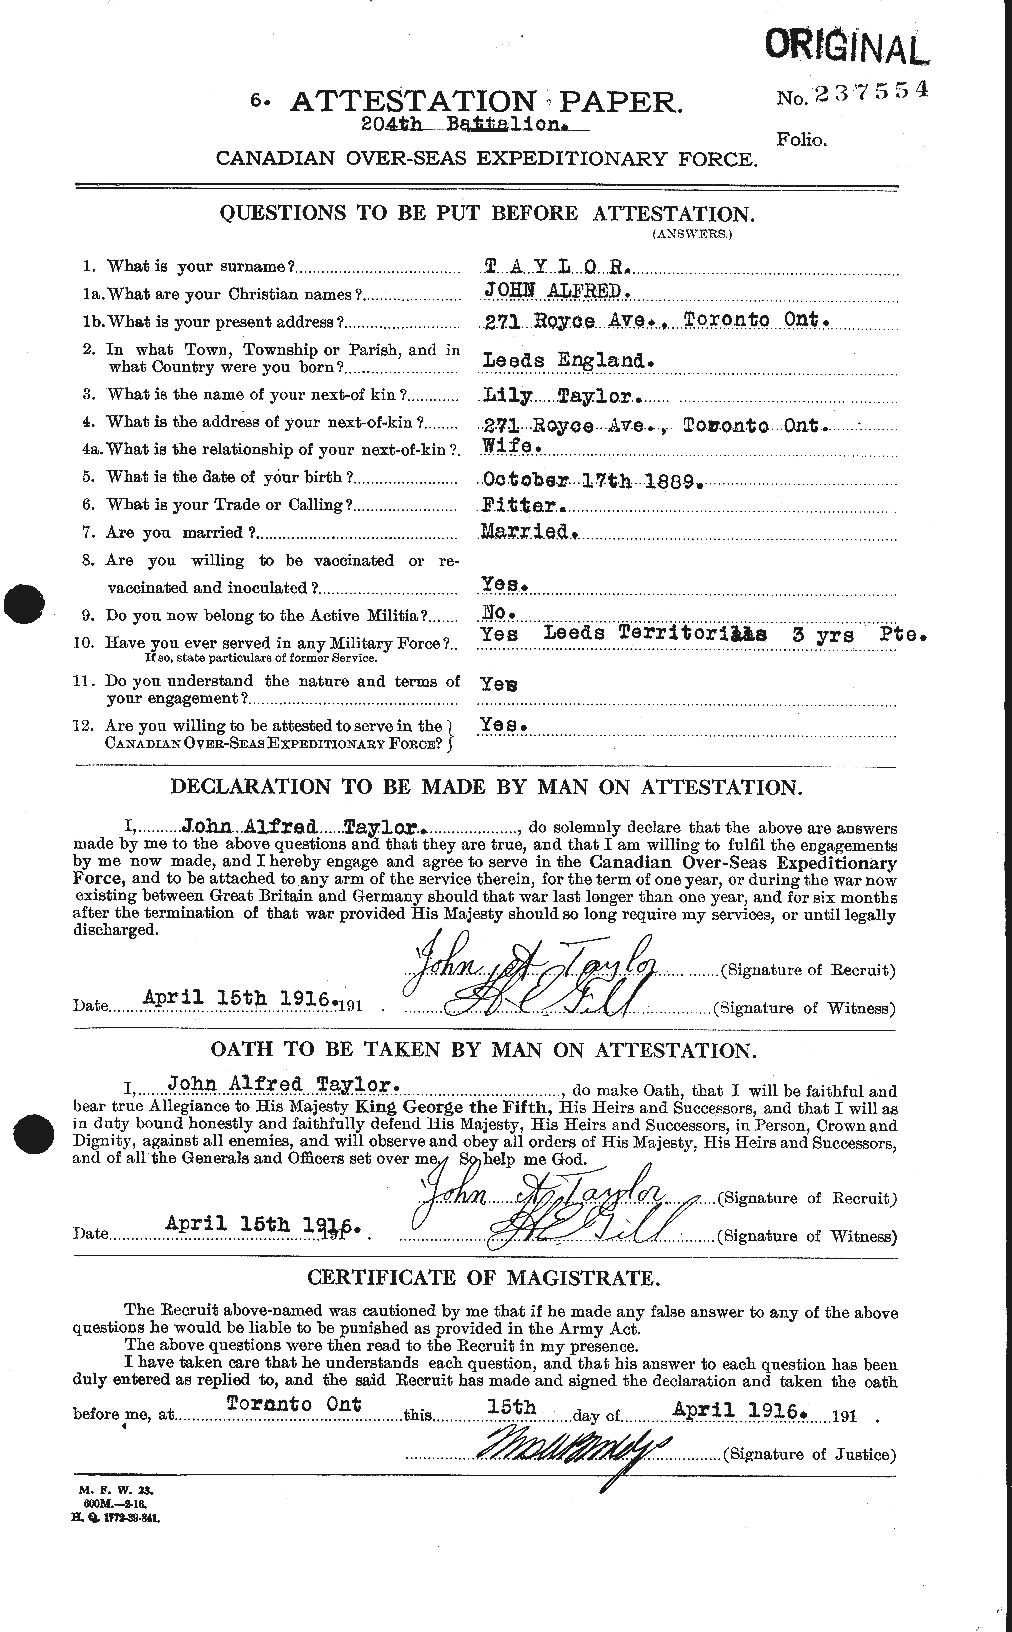 Personnel Records of the First World War - CEF 627044a